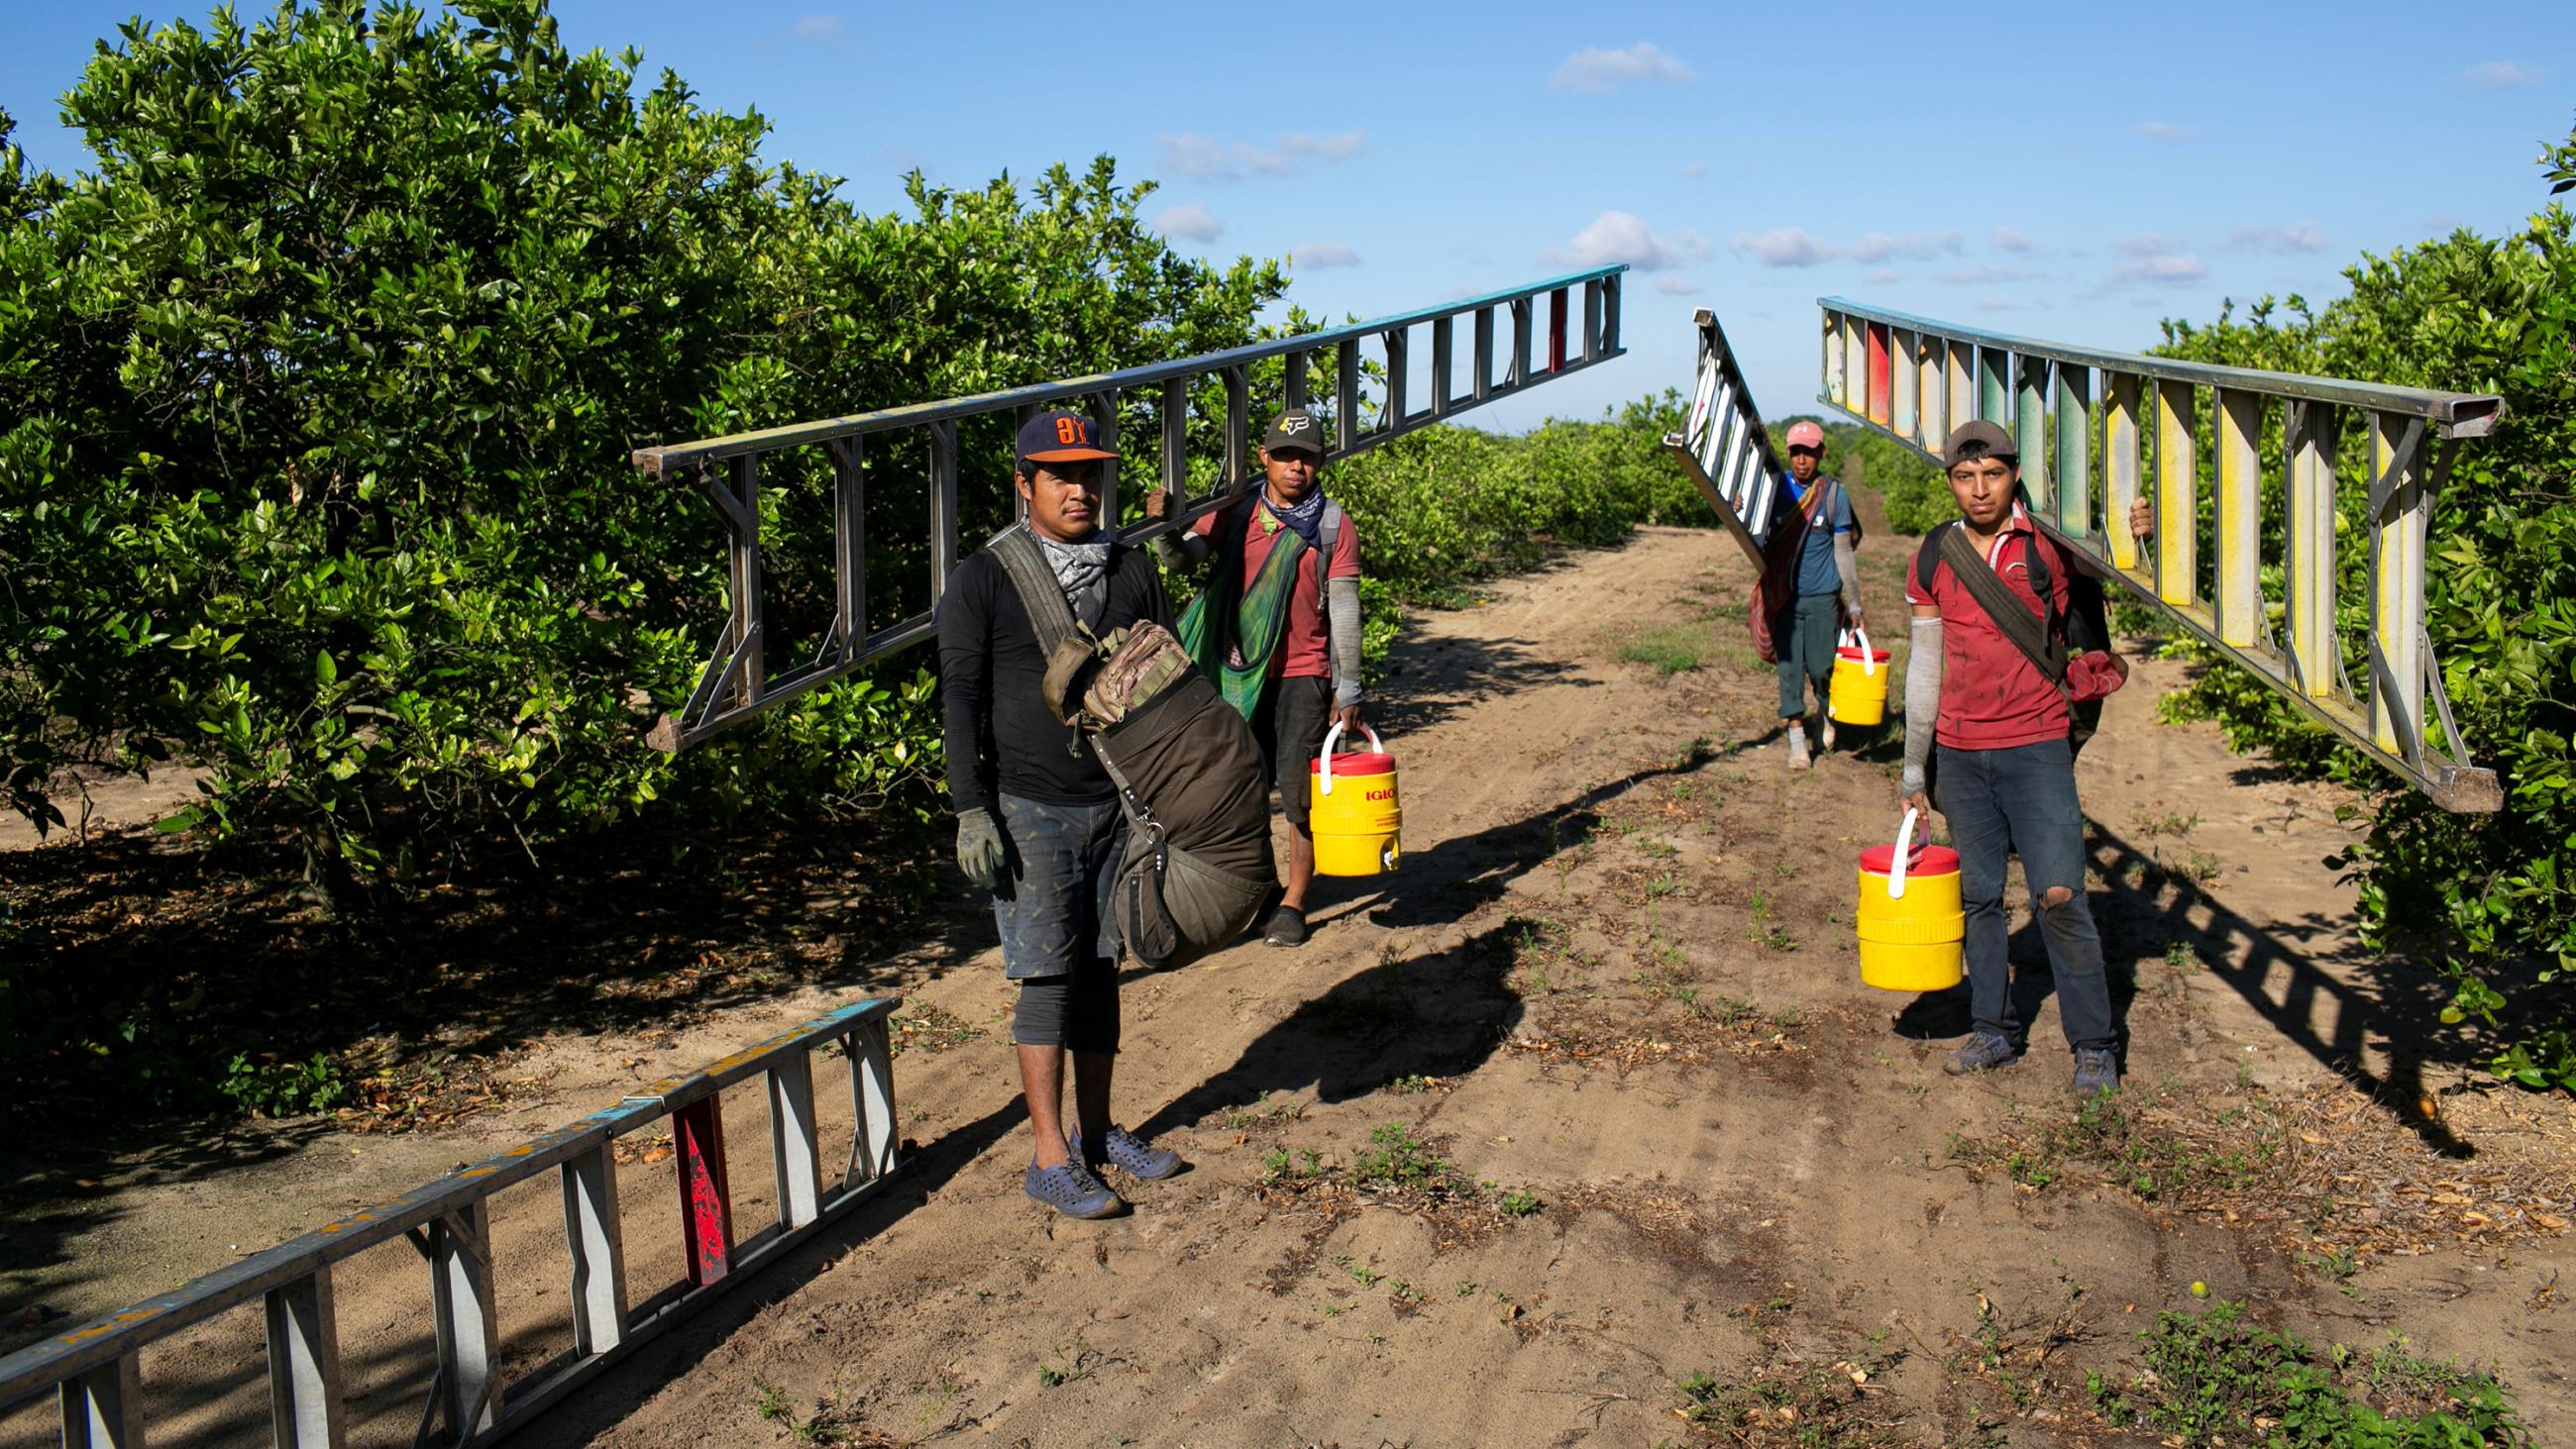 Picture shows several farm workers carrying long ladders among trees in an orange grove. 